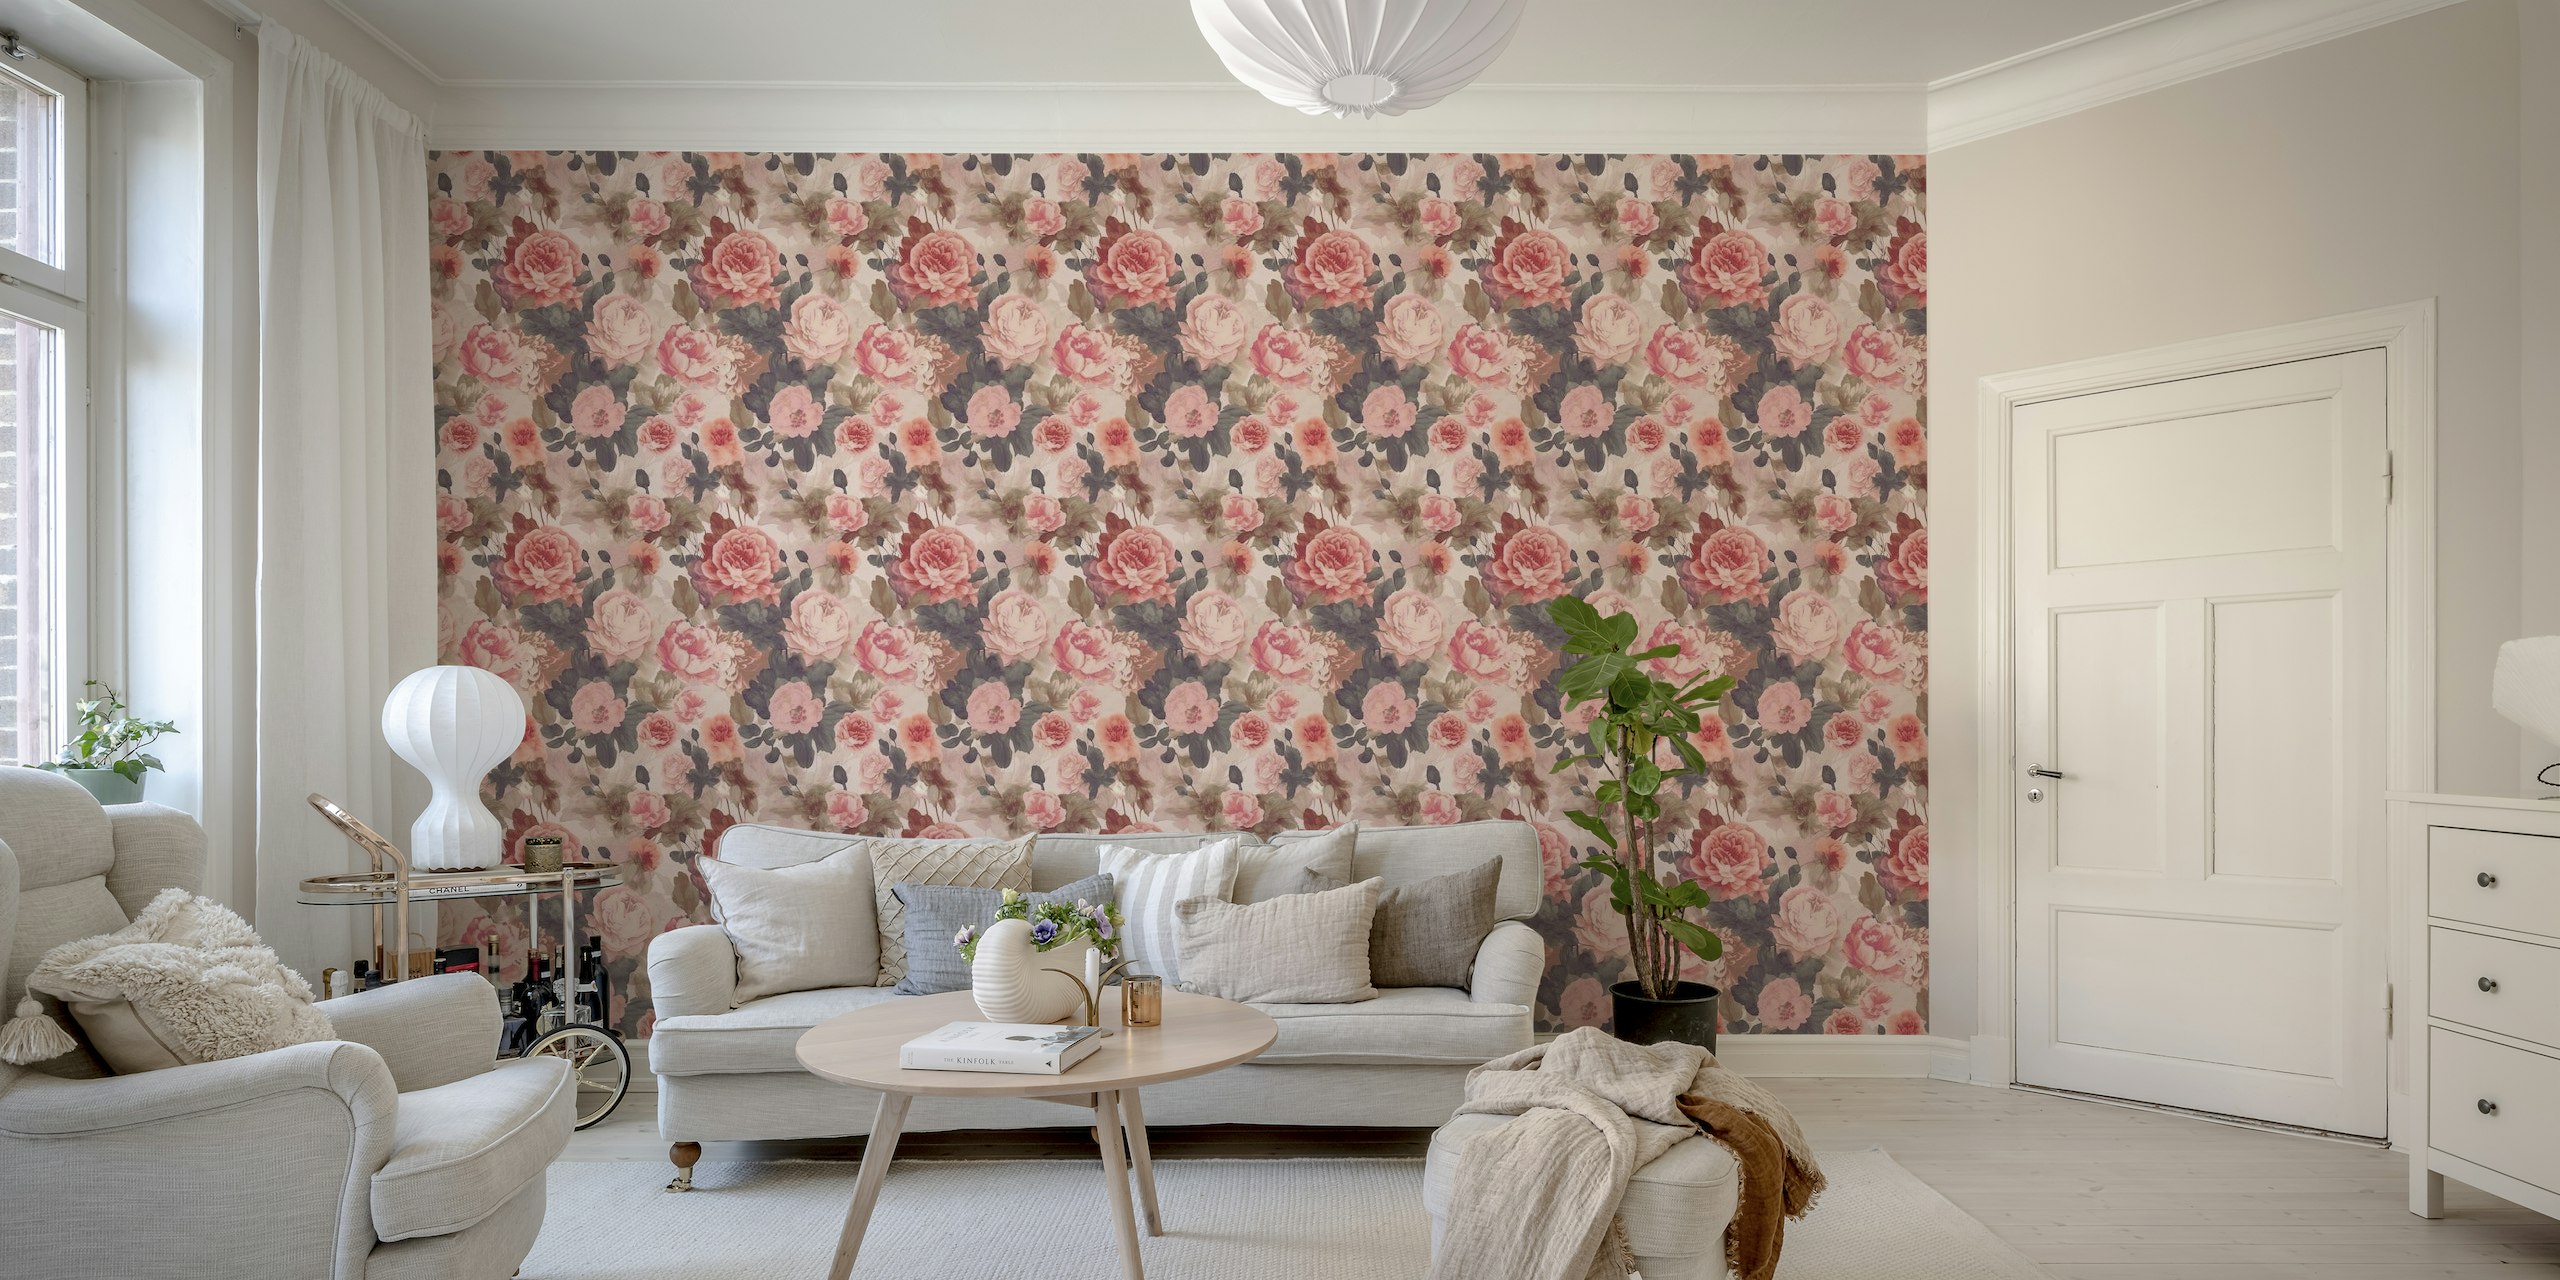 Baroque Roses Floral Nostalgia Design In Moody Pink Colors ταπετσαρία